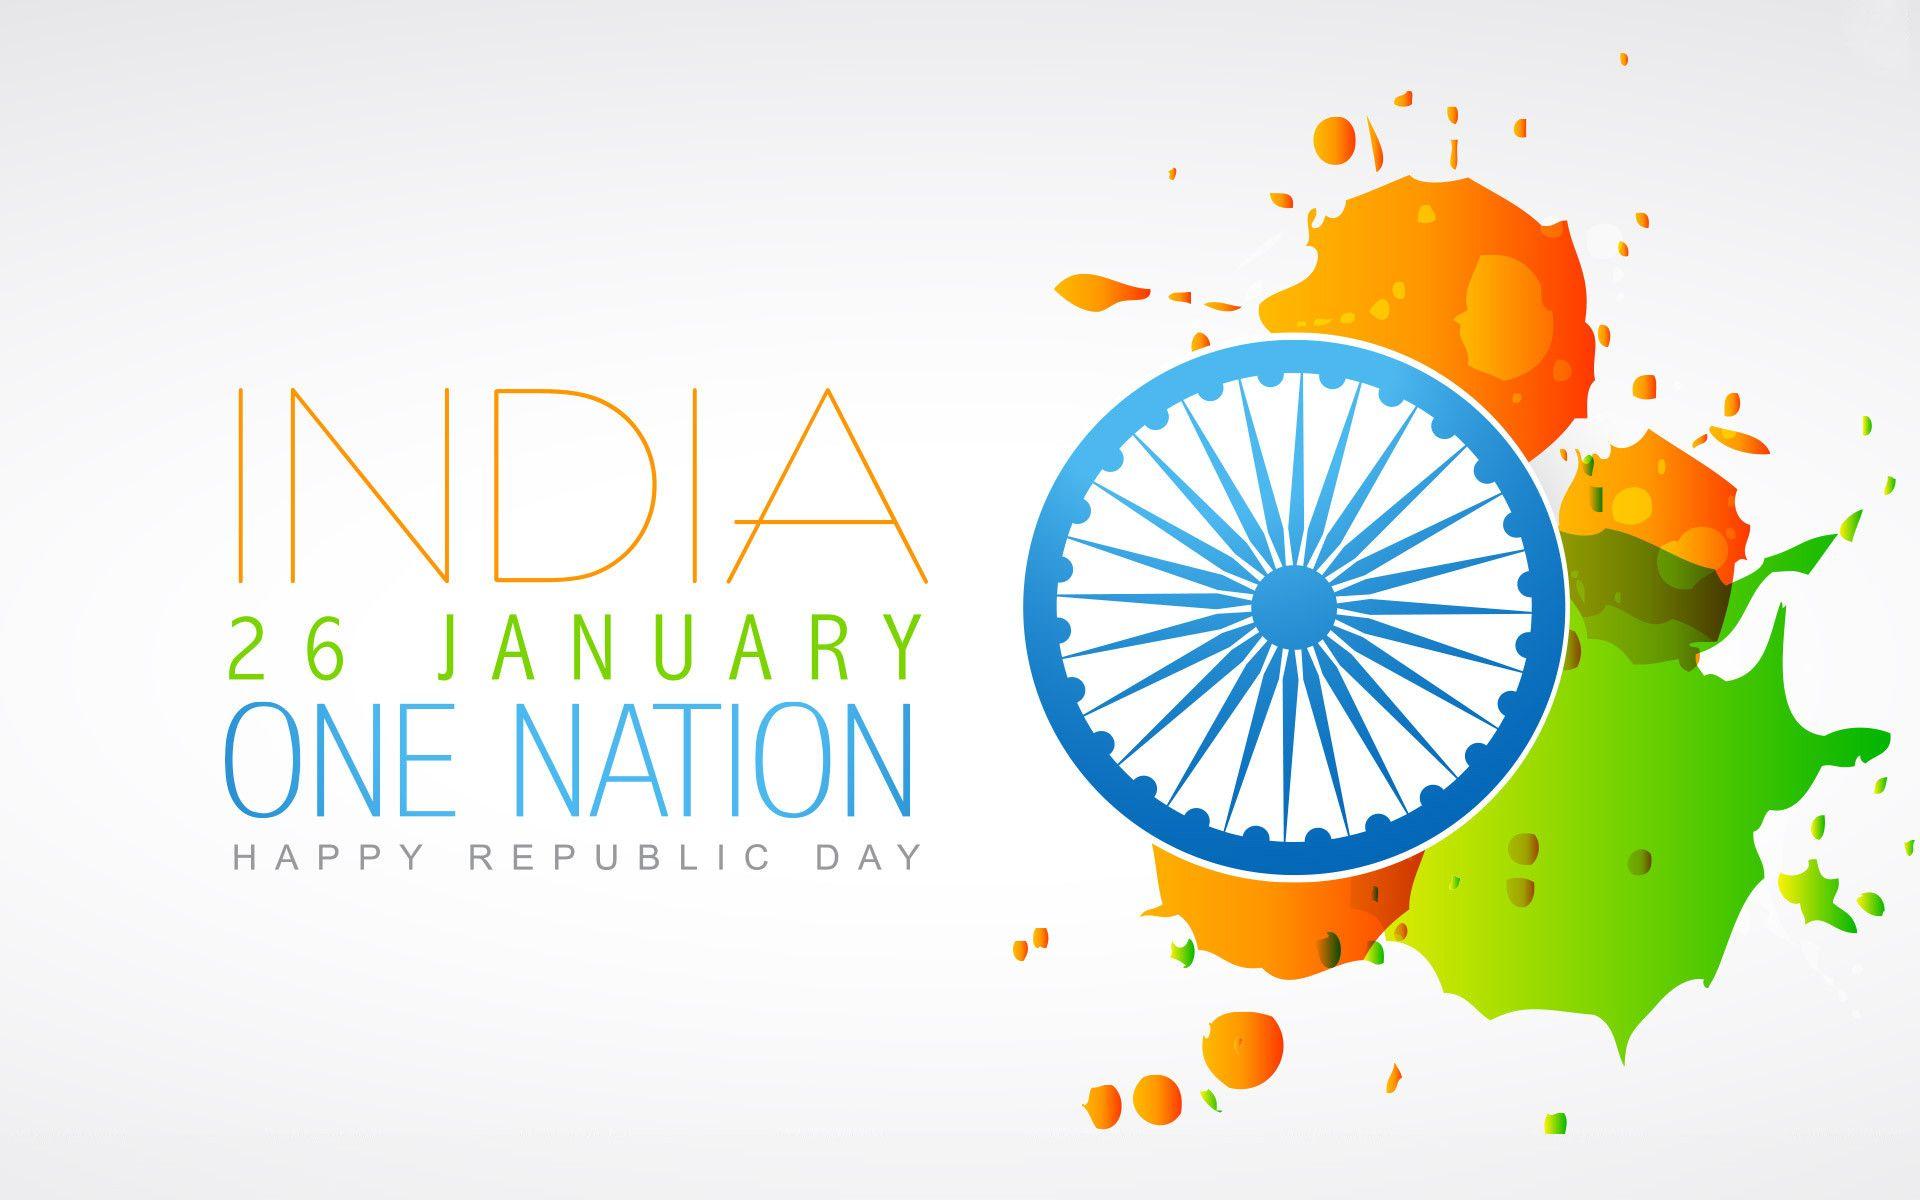 Happy Republic Day 2015 Wallpaper. Independence Day Quotes